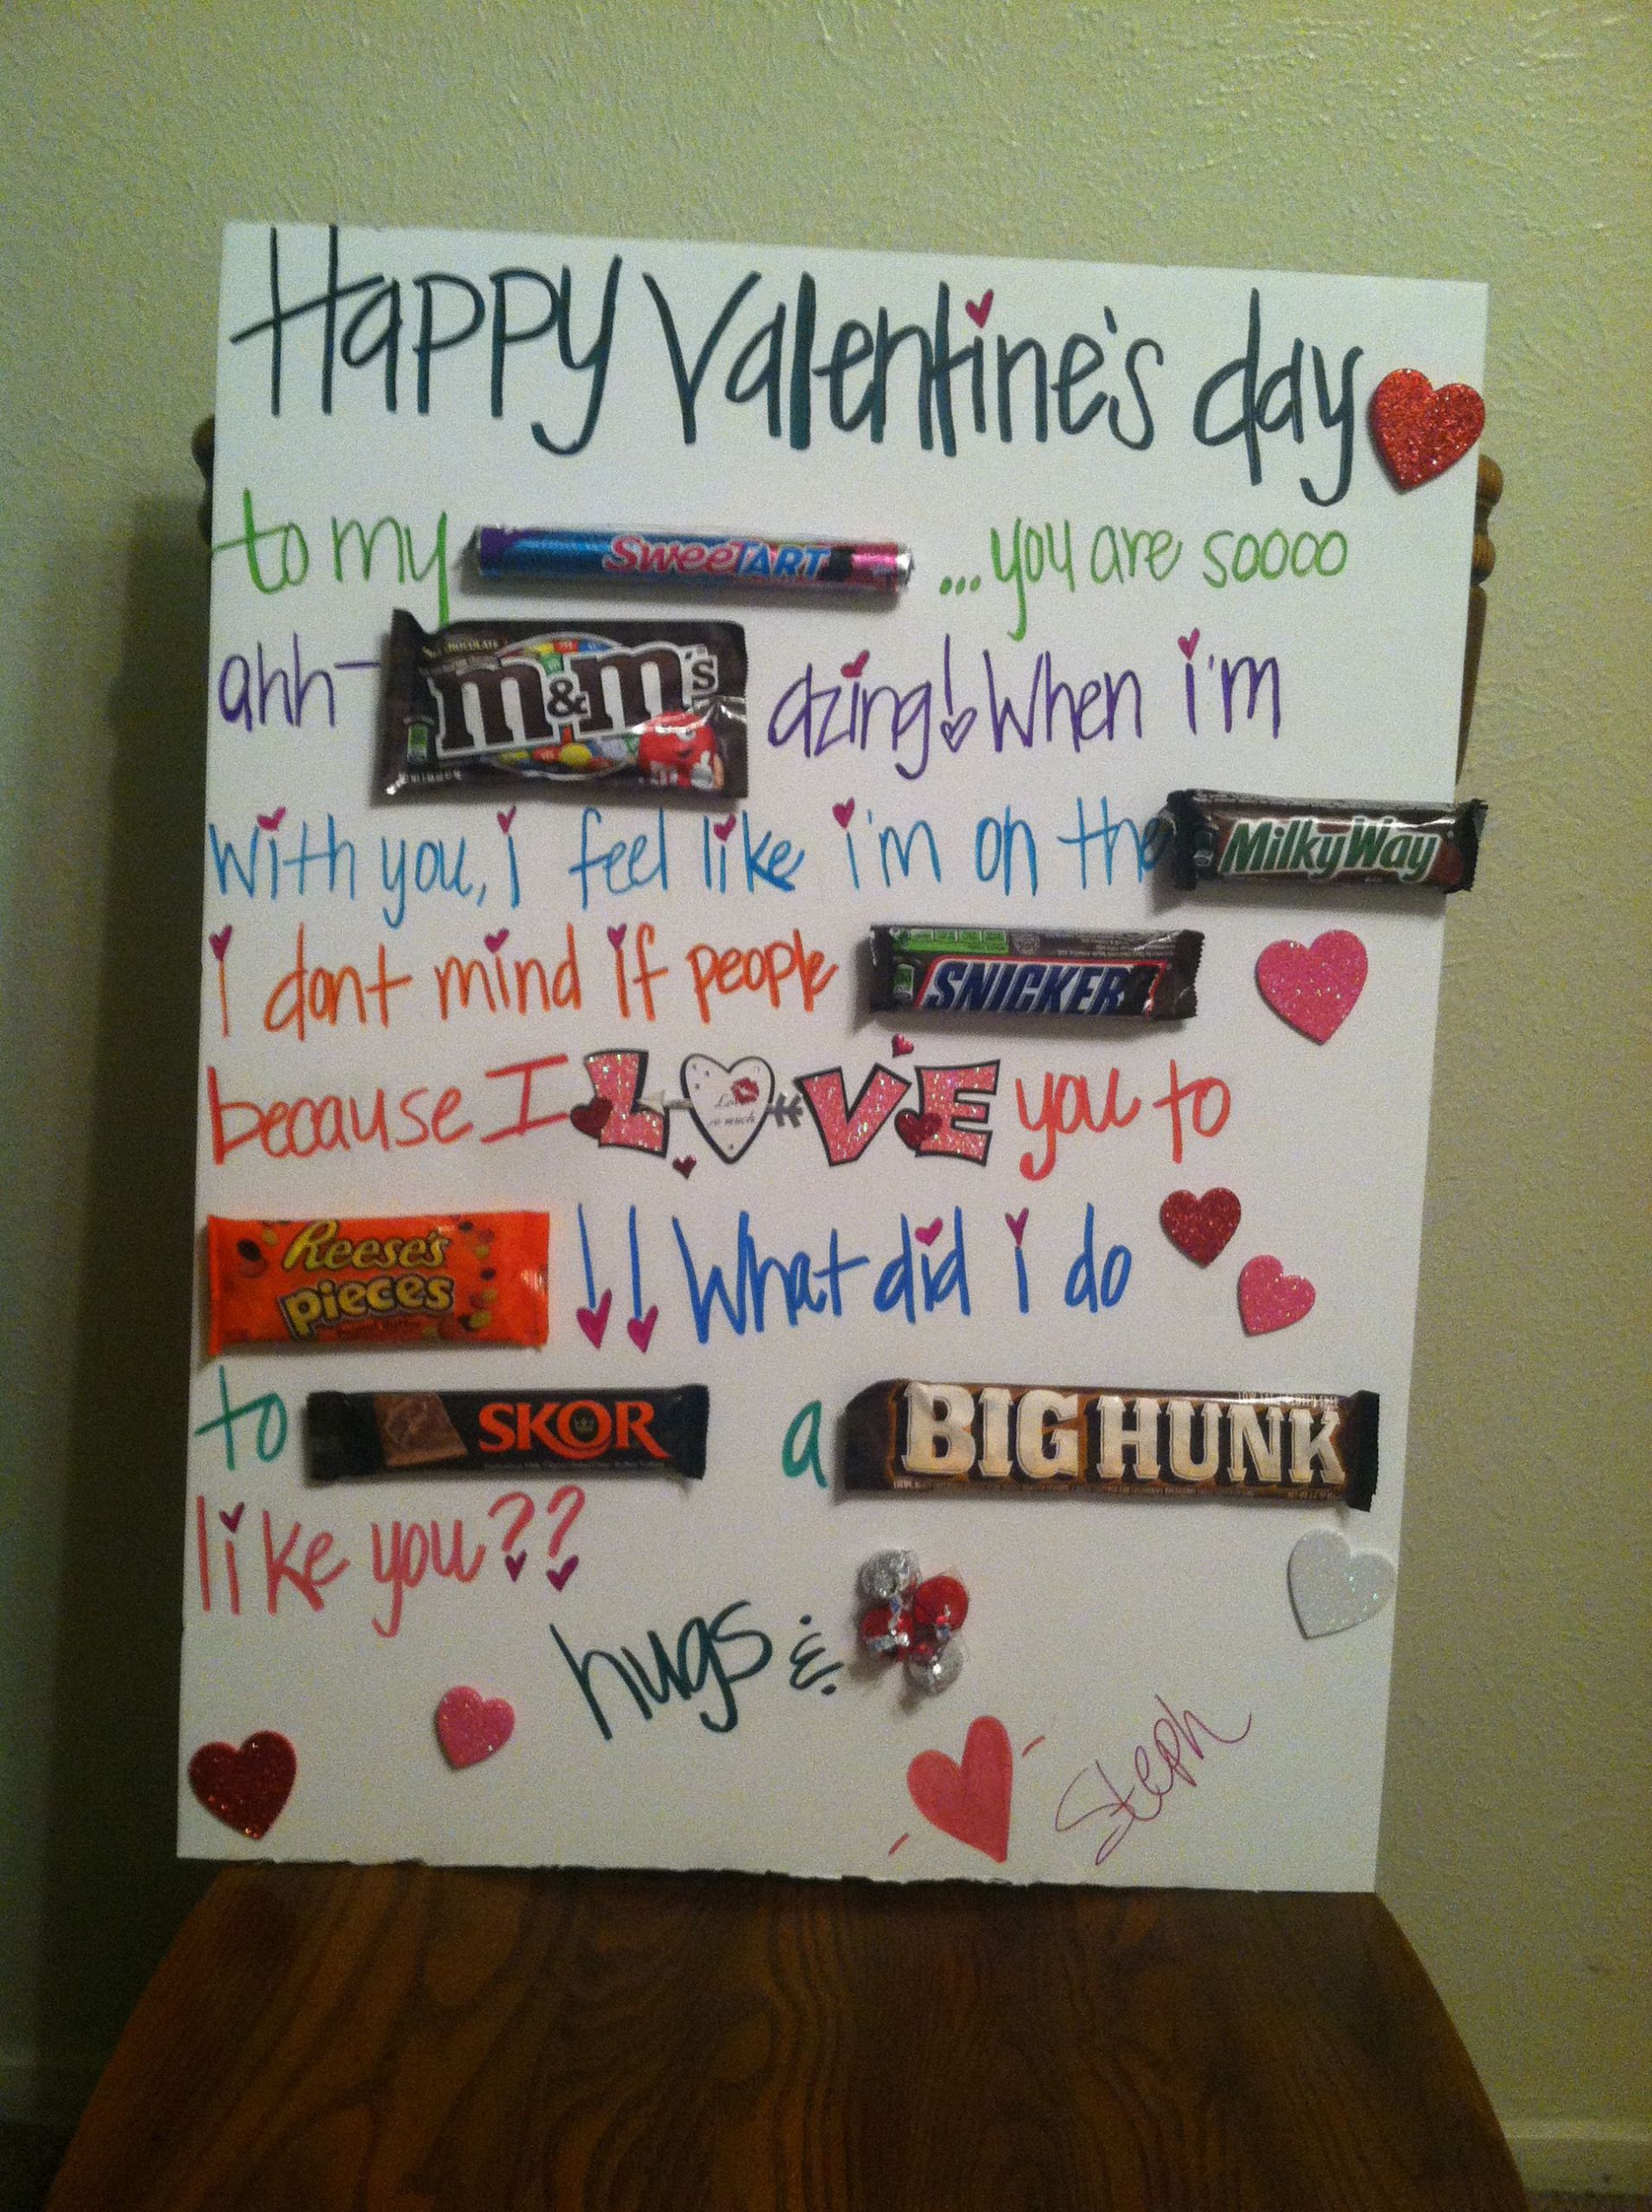 Valentines Day Card With Candy
 My Candy Bar Poster for my Hunny for Valentine s Day